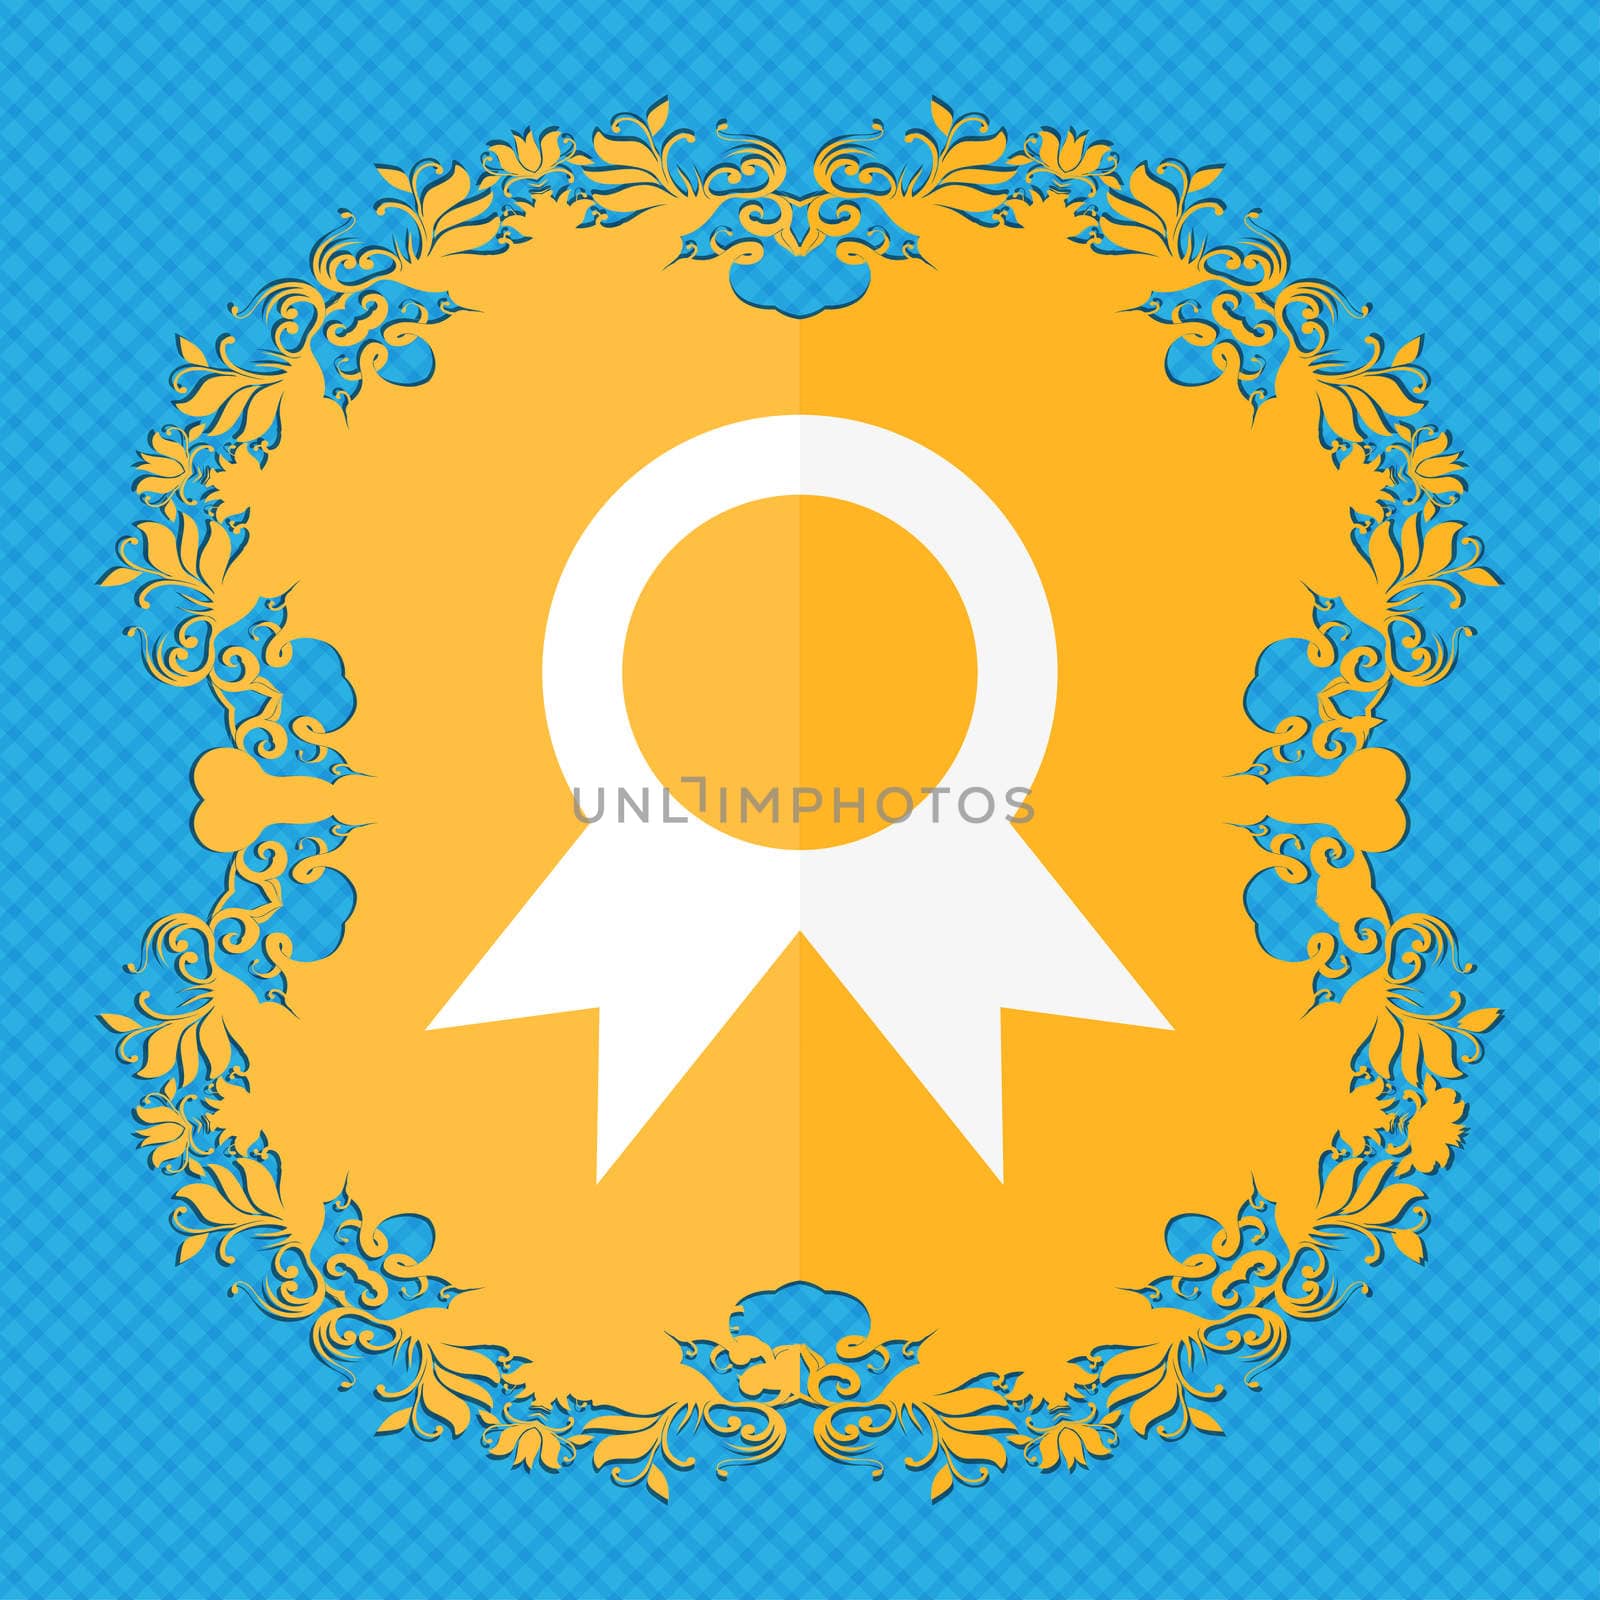 Award, Prize for winner . Floral flat design on a blue abstract background with place for your text. illustration